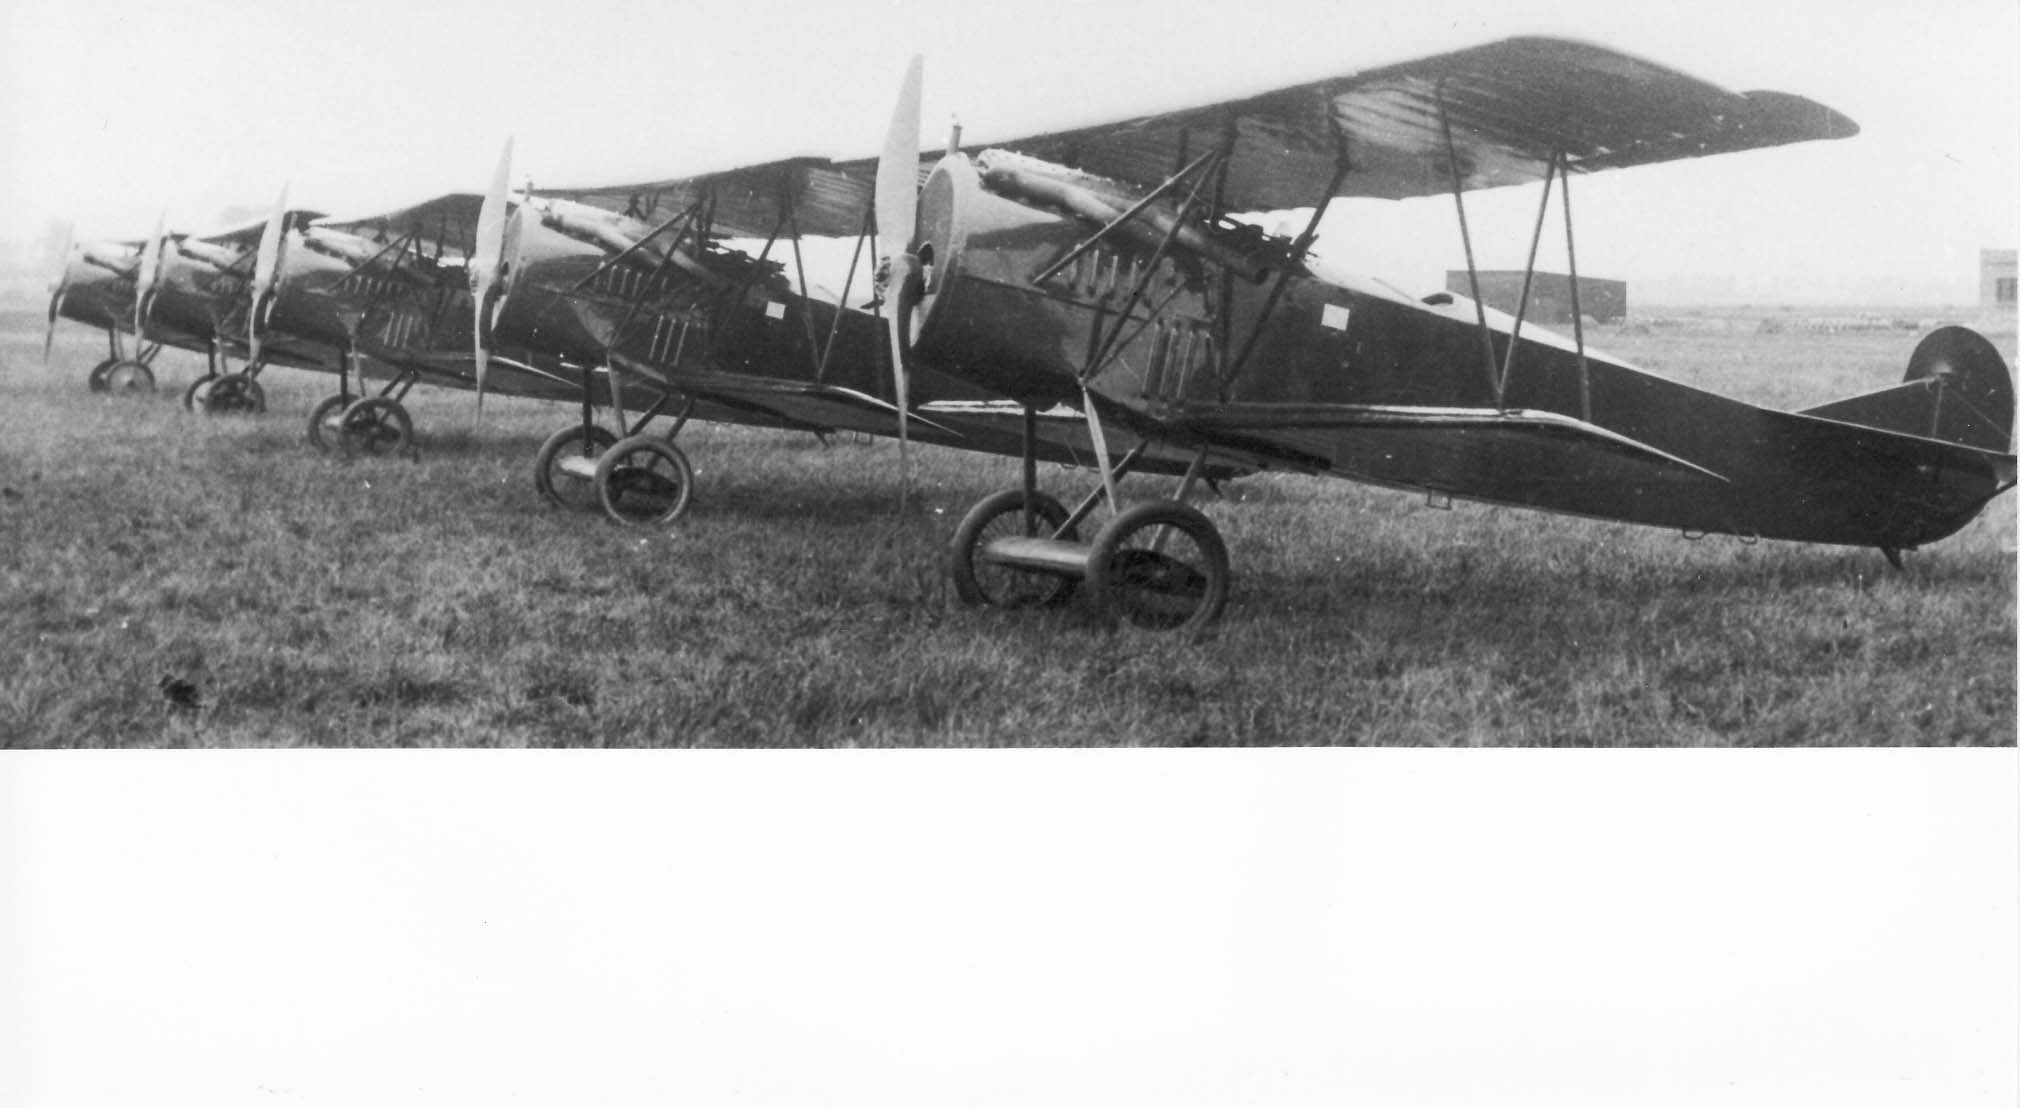 Lineup of unregistered Fokker D.VII's destined for the LA-KNIL